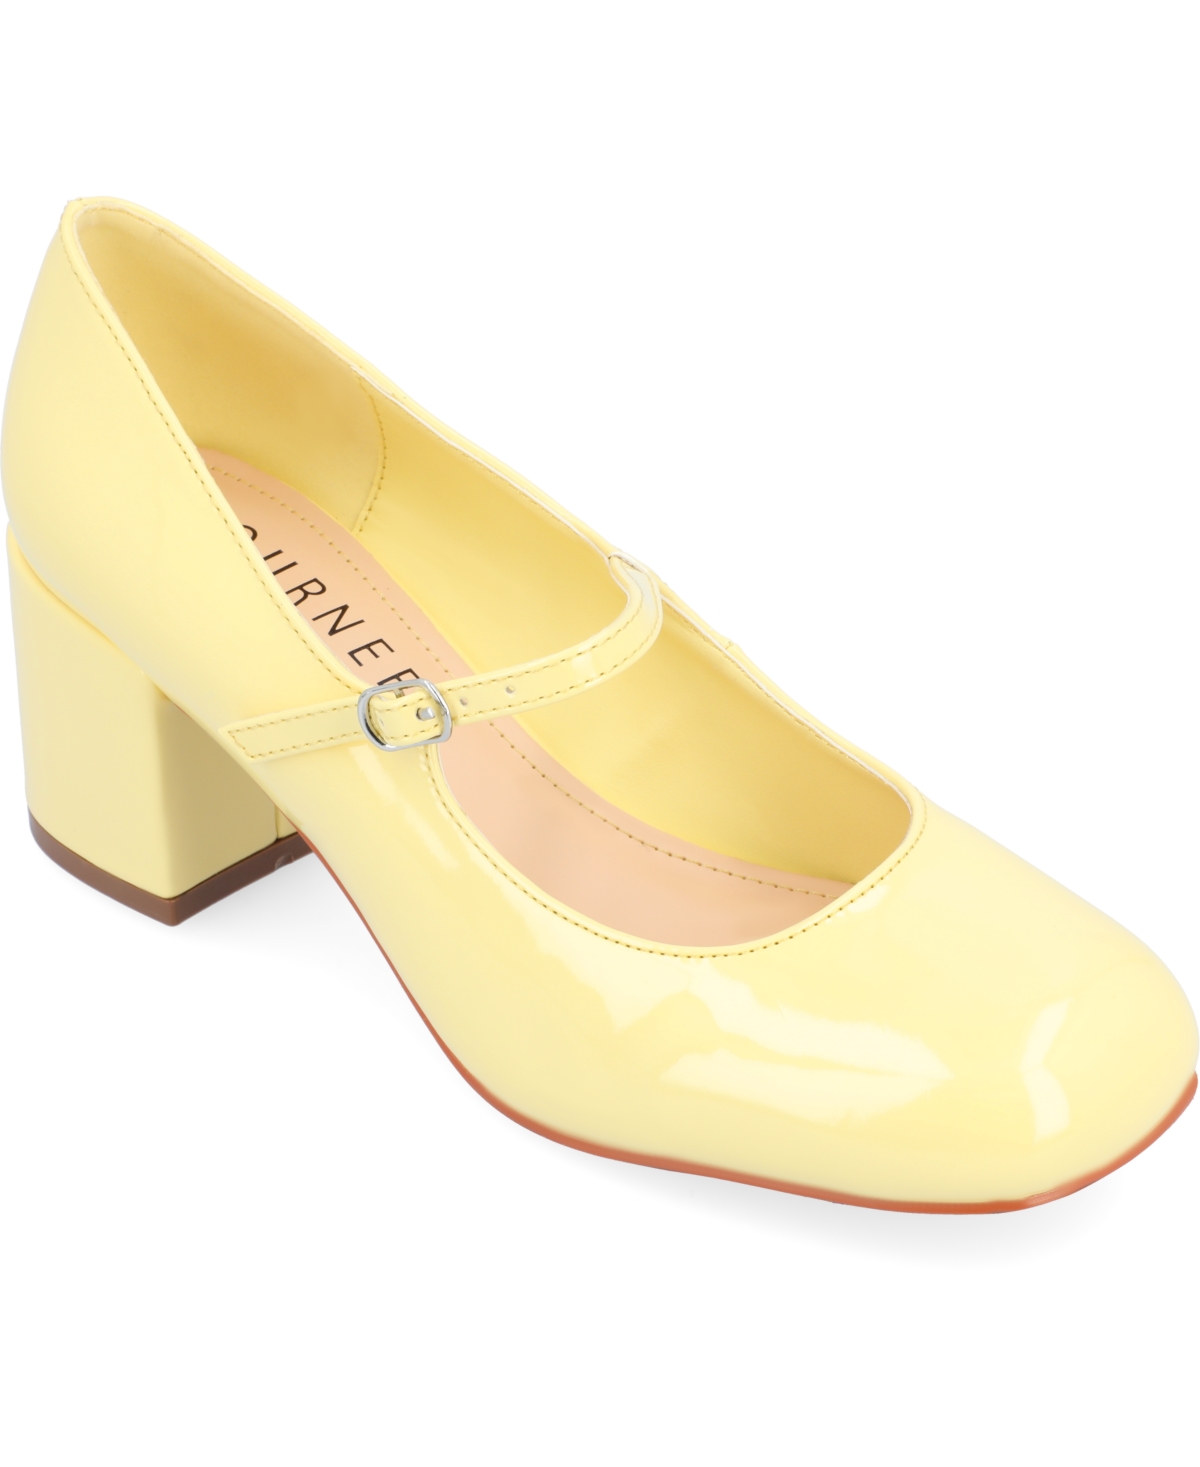 Vintage Shoes in Pictures | Shop Vintage Style Shoes Journee Collection Womens Okenna Heels - Yellow $74.99 AT vintagedancer.com